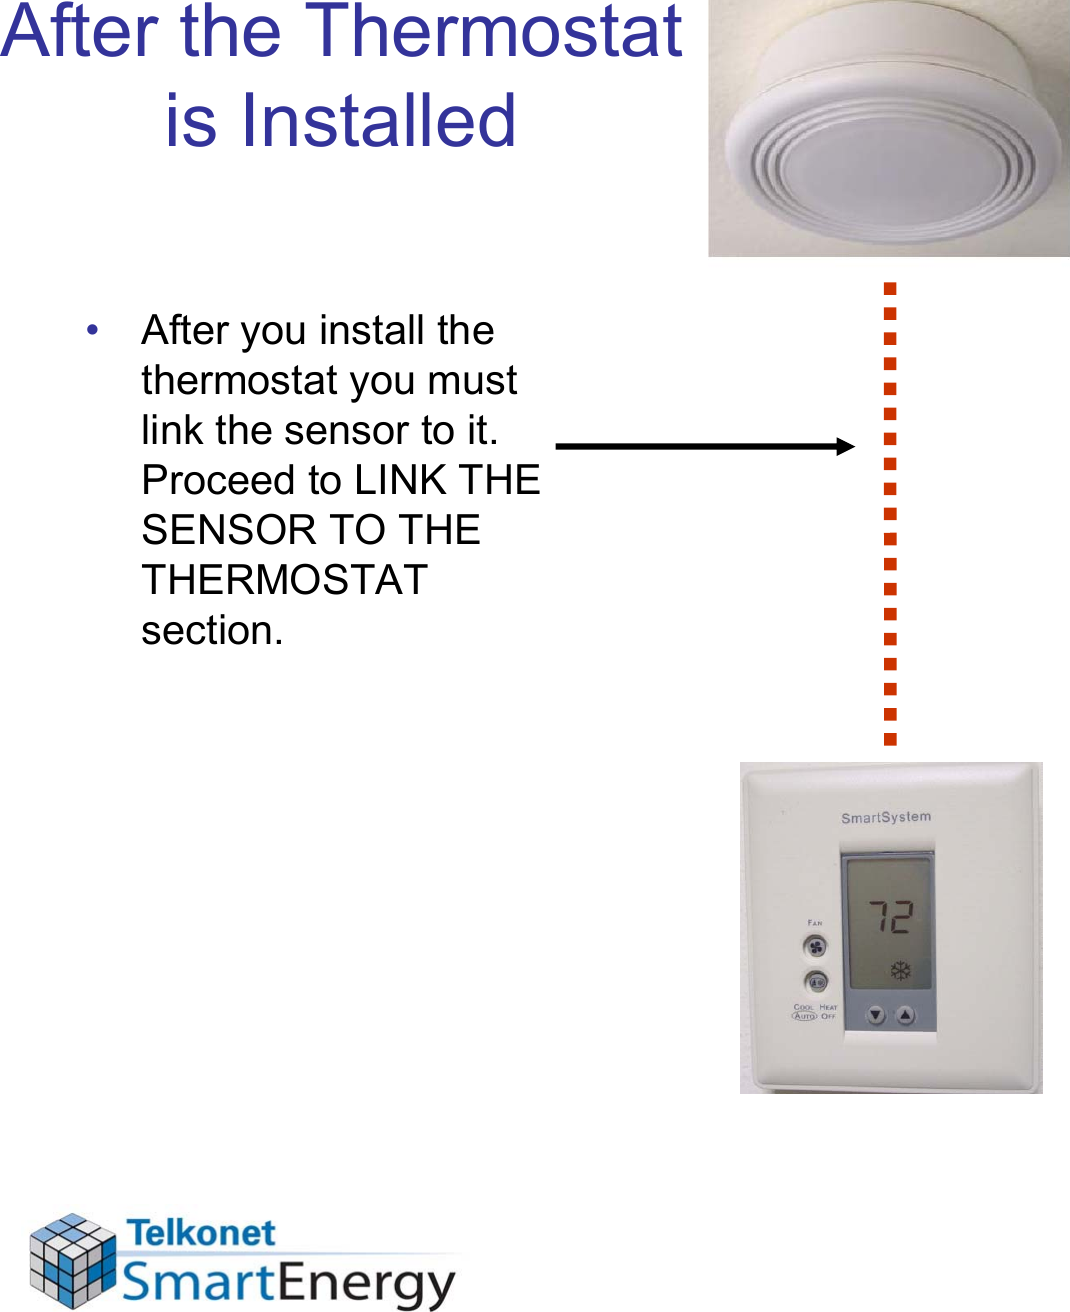 After the Thermostat is Installed• After you install the thermostat you must link the sensor to it. Proceed to LINK THE SENSOR TO THE THERMOSTAT section.